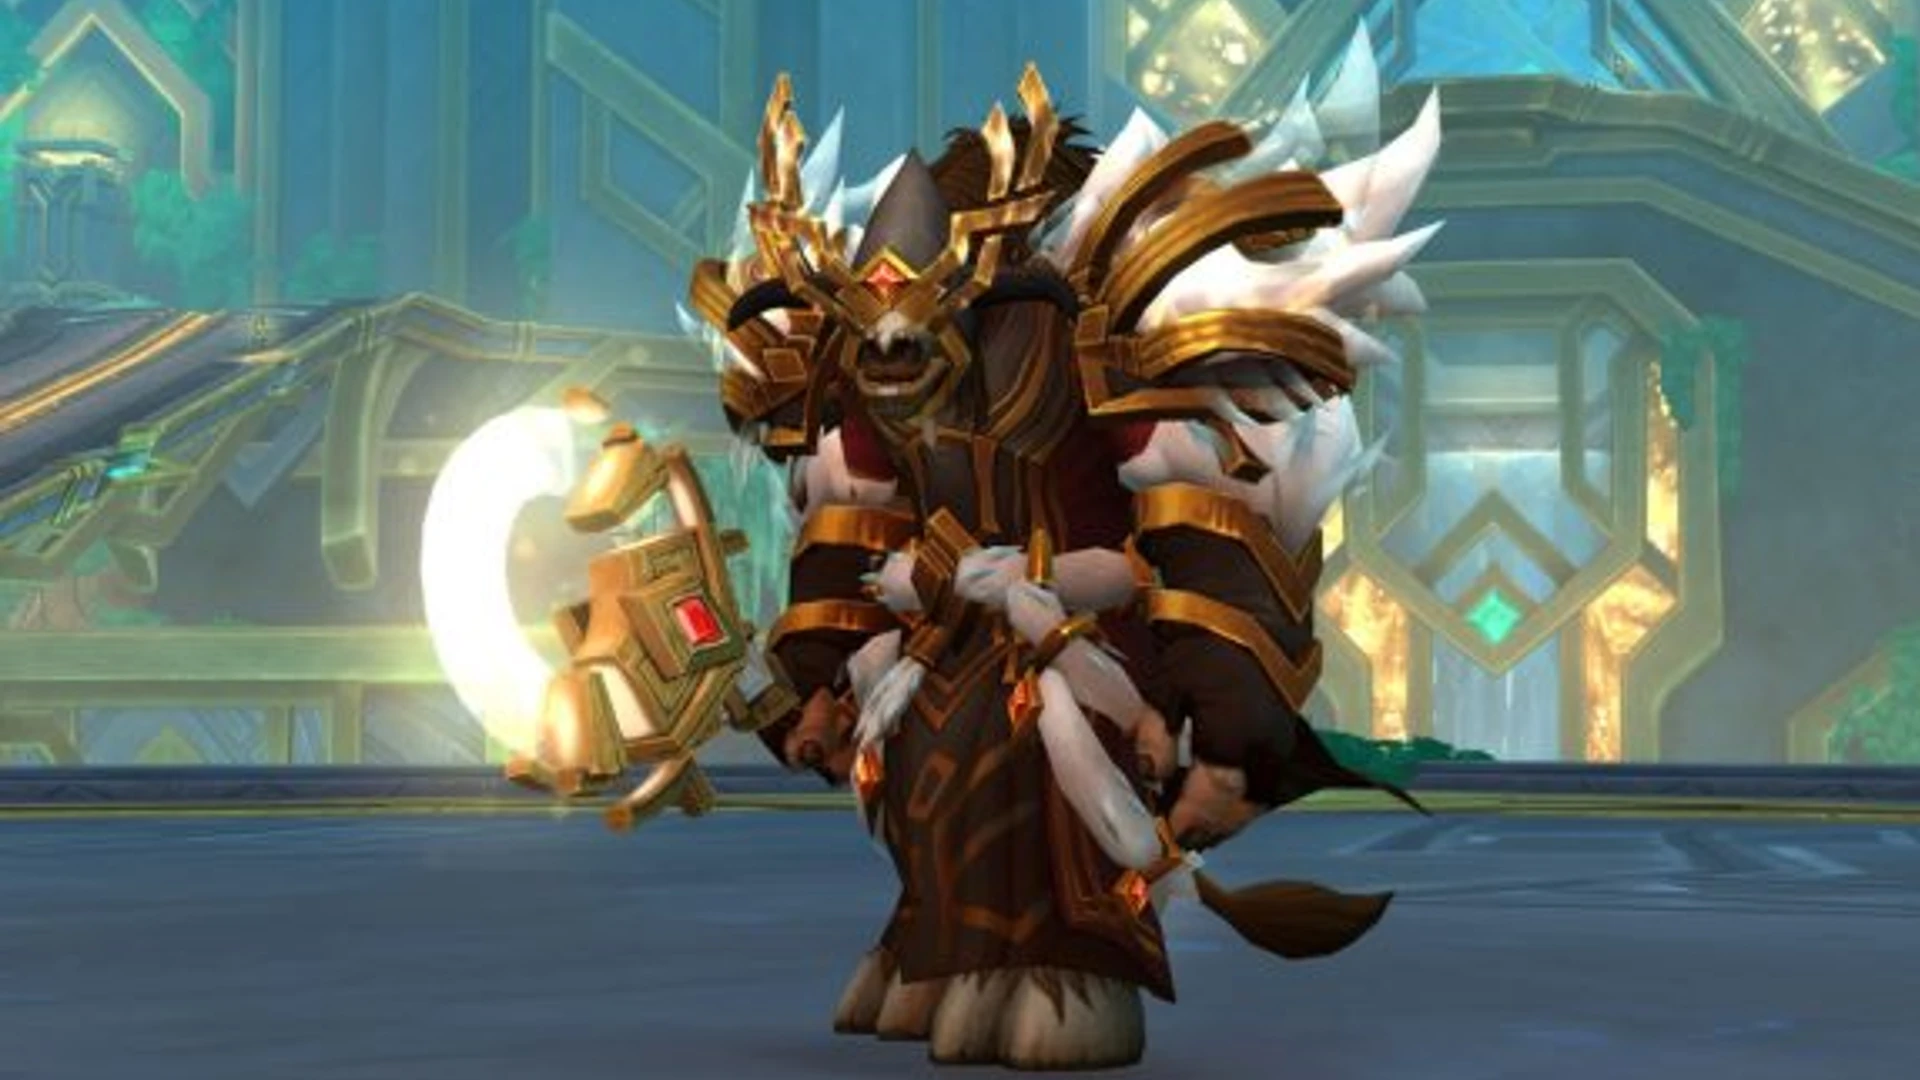 WoW devs are building a “Hybrid Approach” to class sets